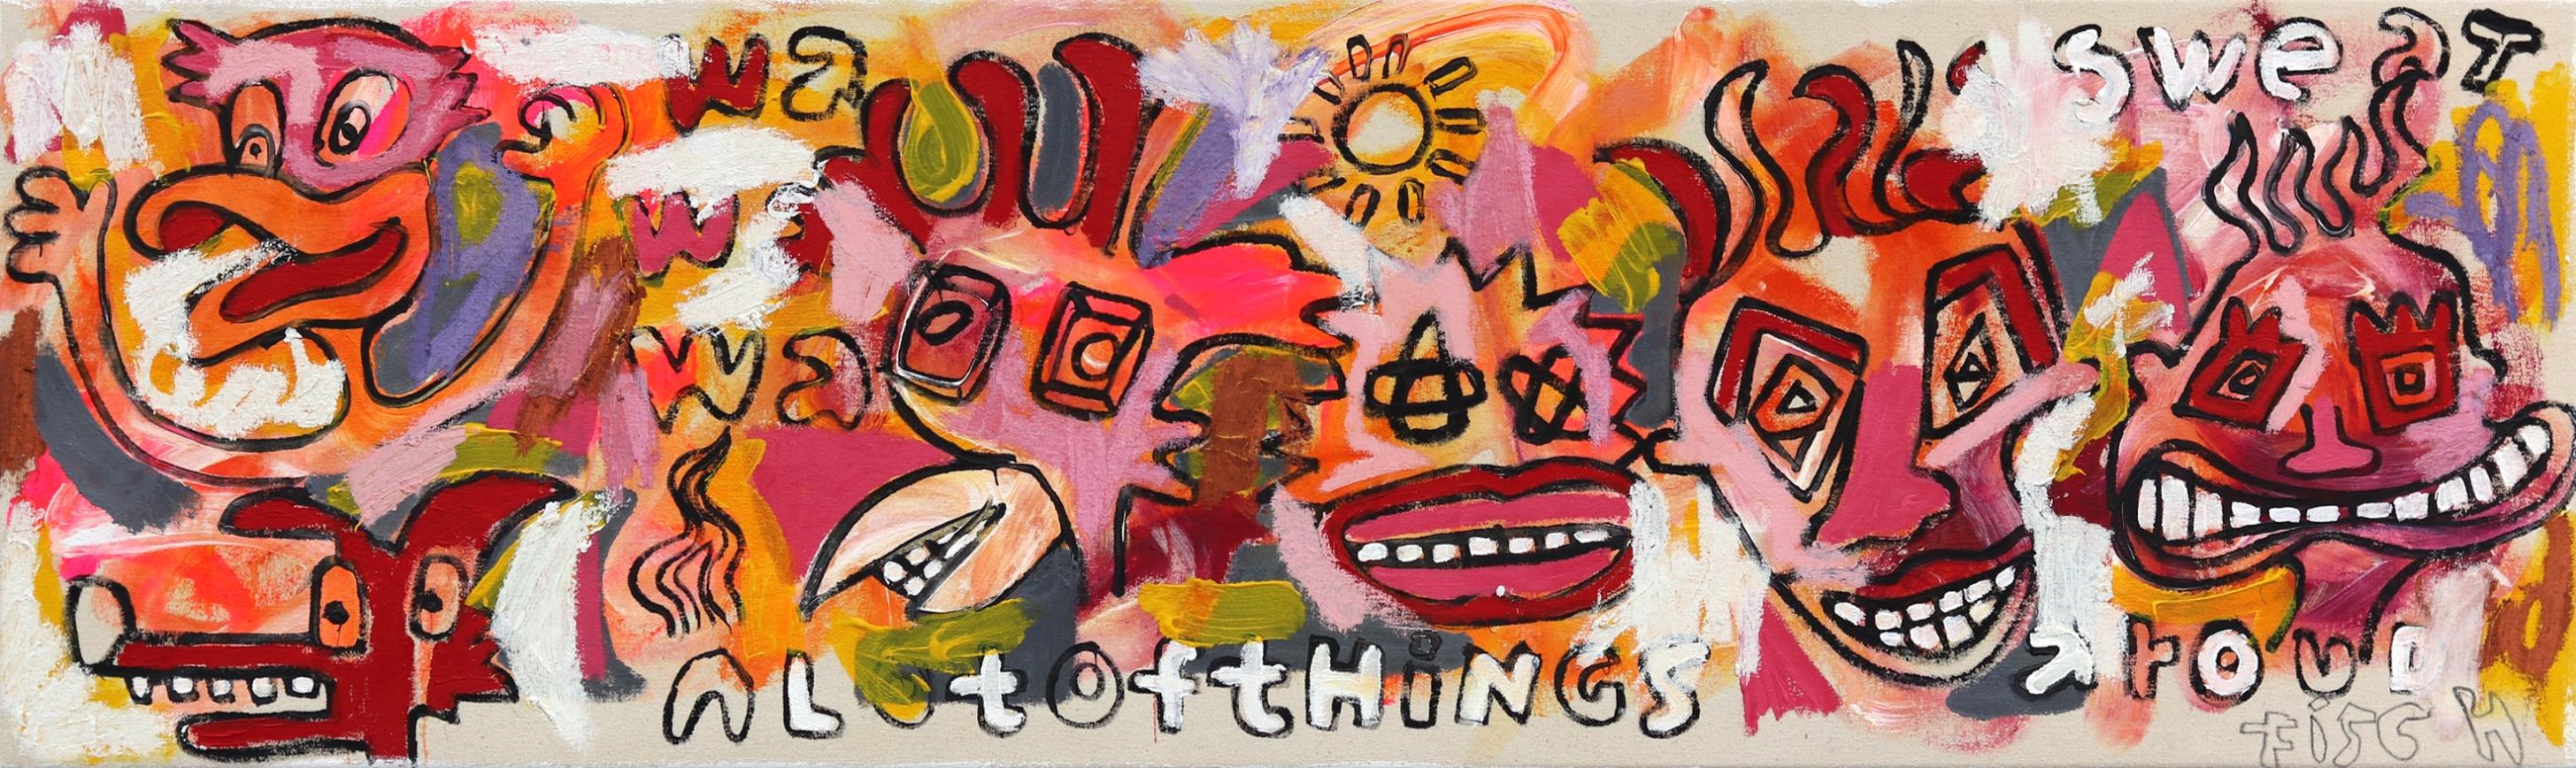 A Lot of Things - Red Abstract Expressionist Street Art Original Painting - Mixed Media Art by Jonas Fisch